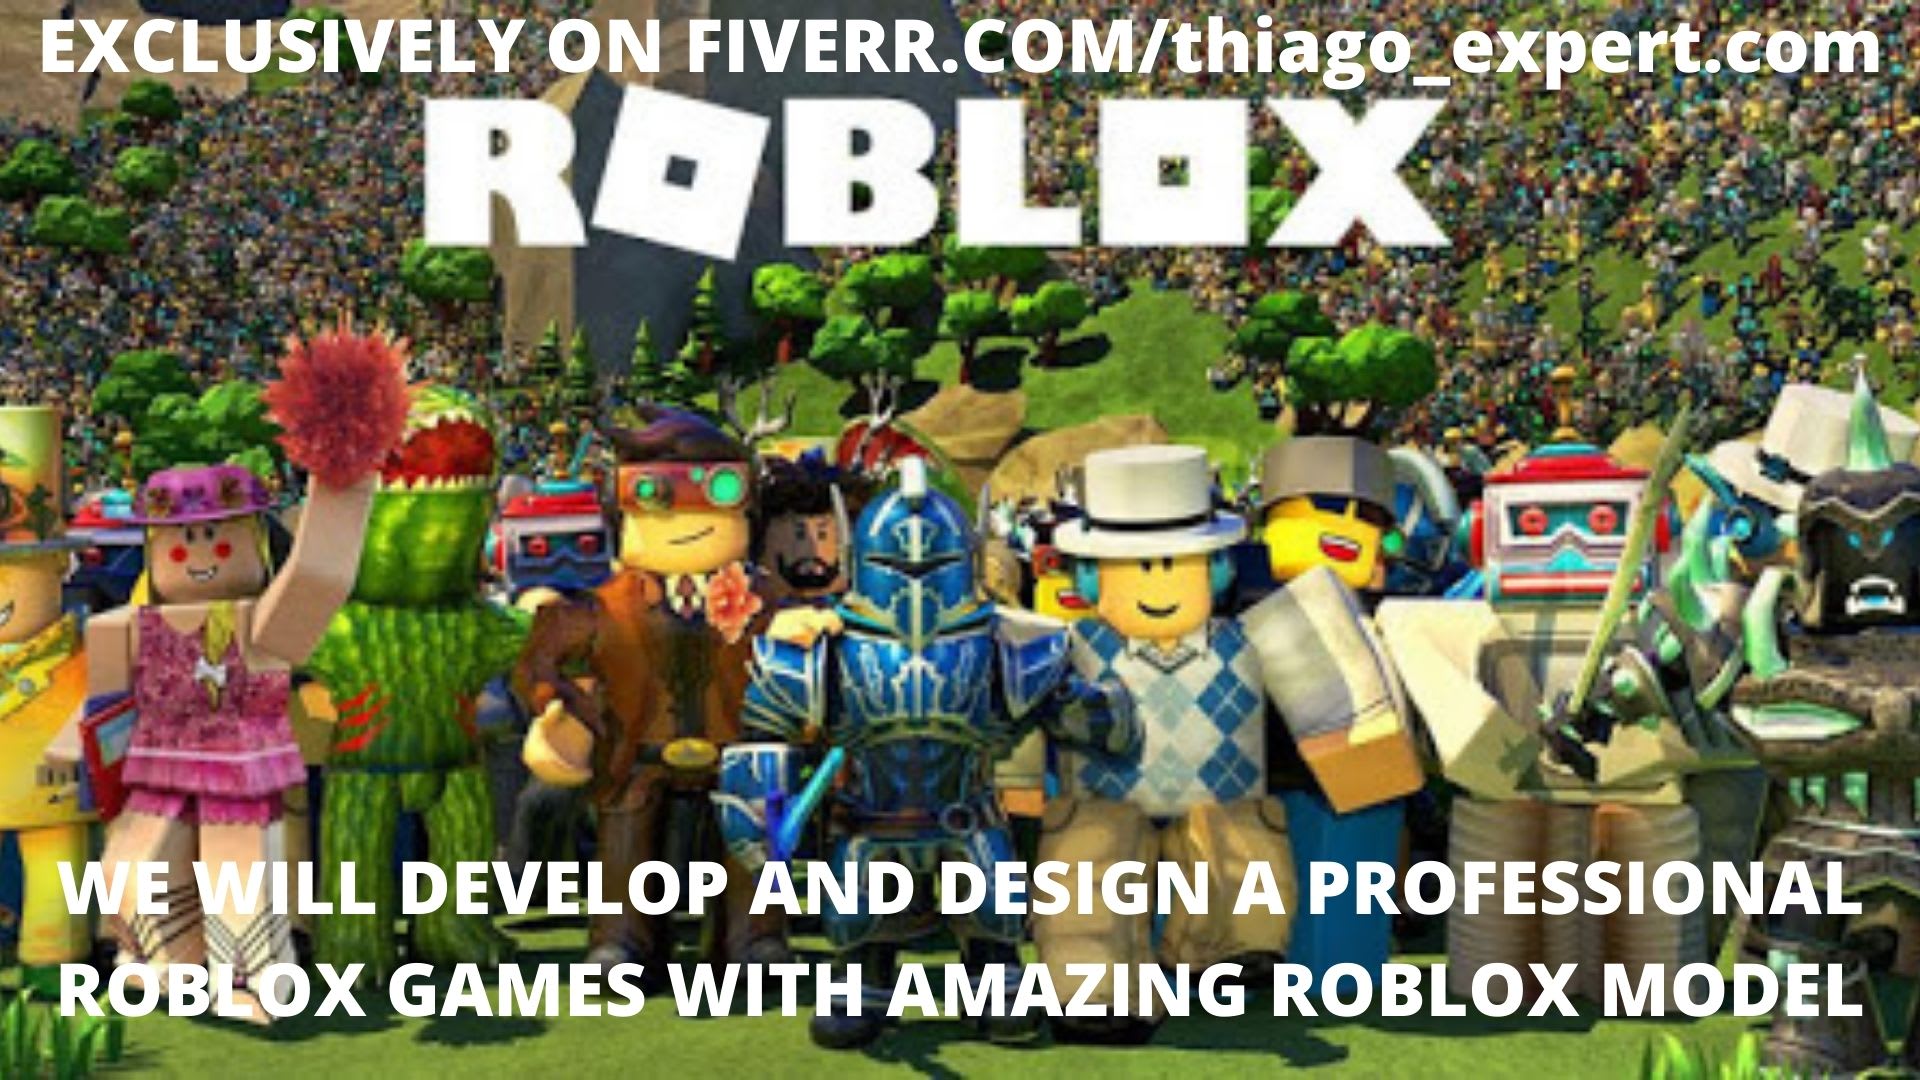 Build A Profitable Roblox Unity Game With Amazing Models For Your Game By Thiago Expert Fiverr - roblox game picture maker